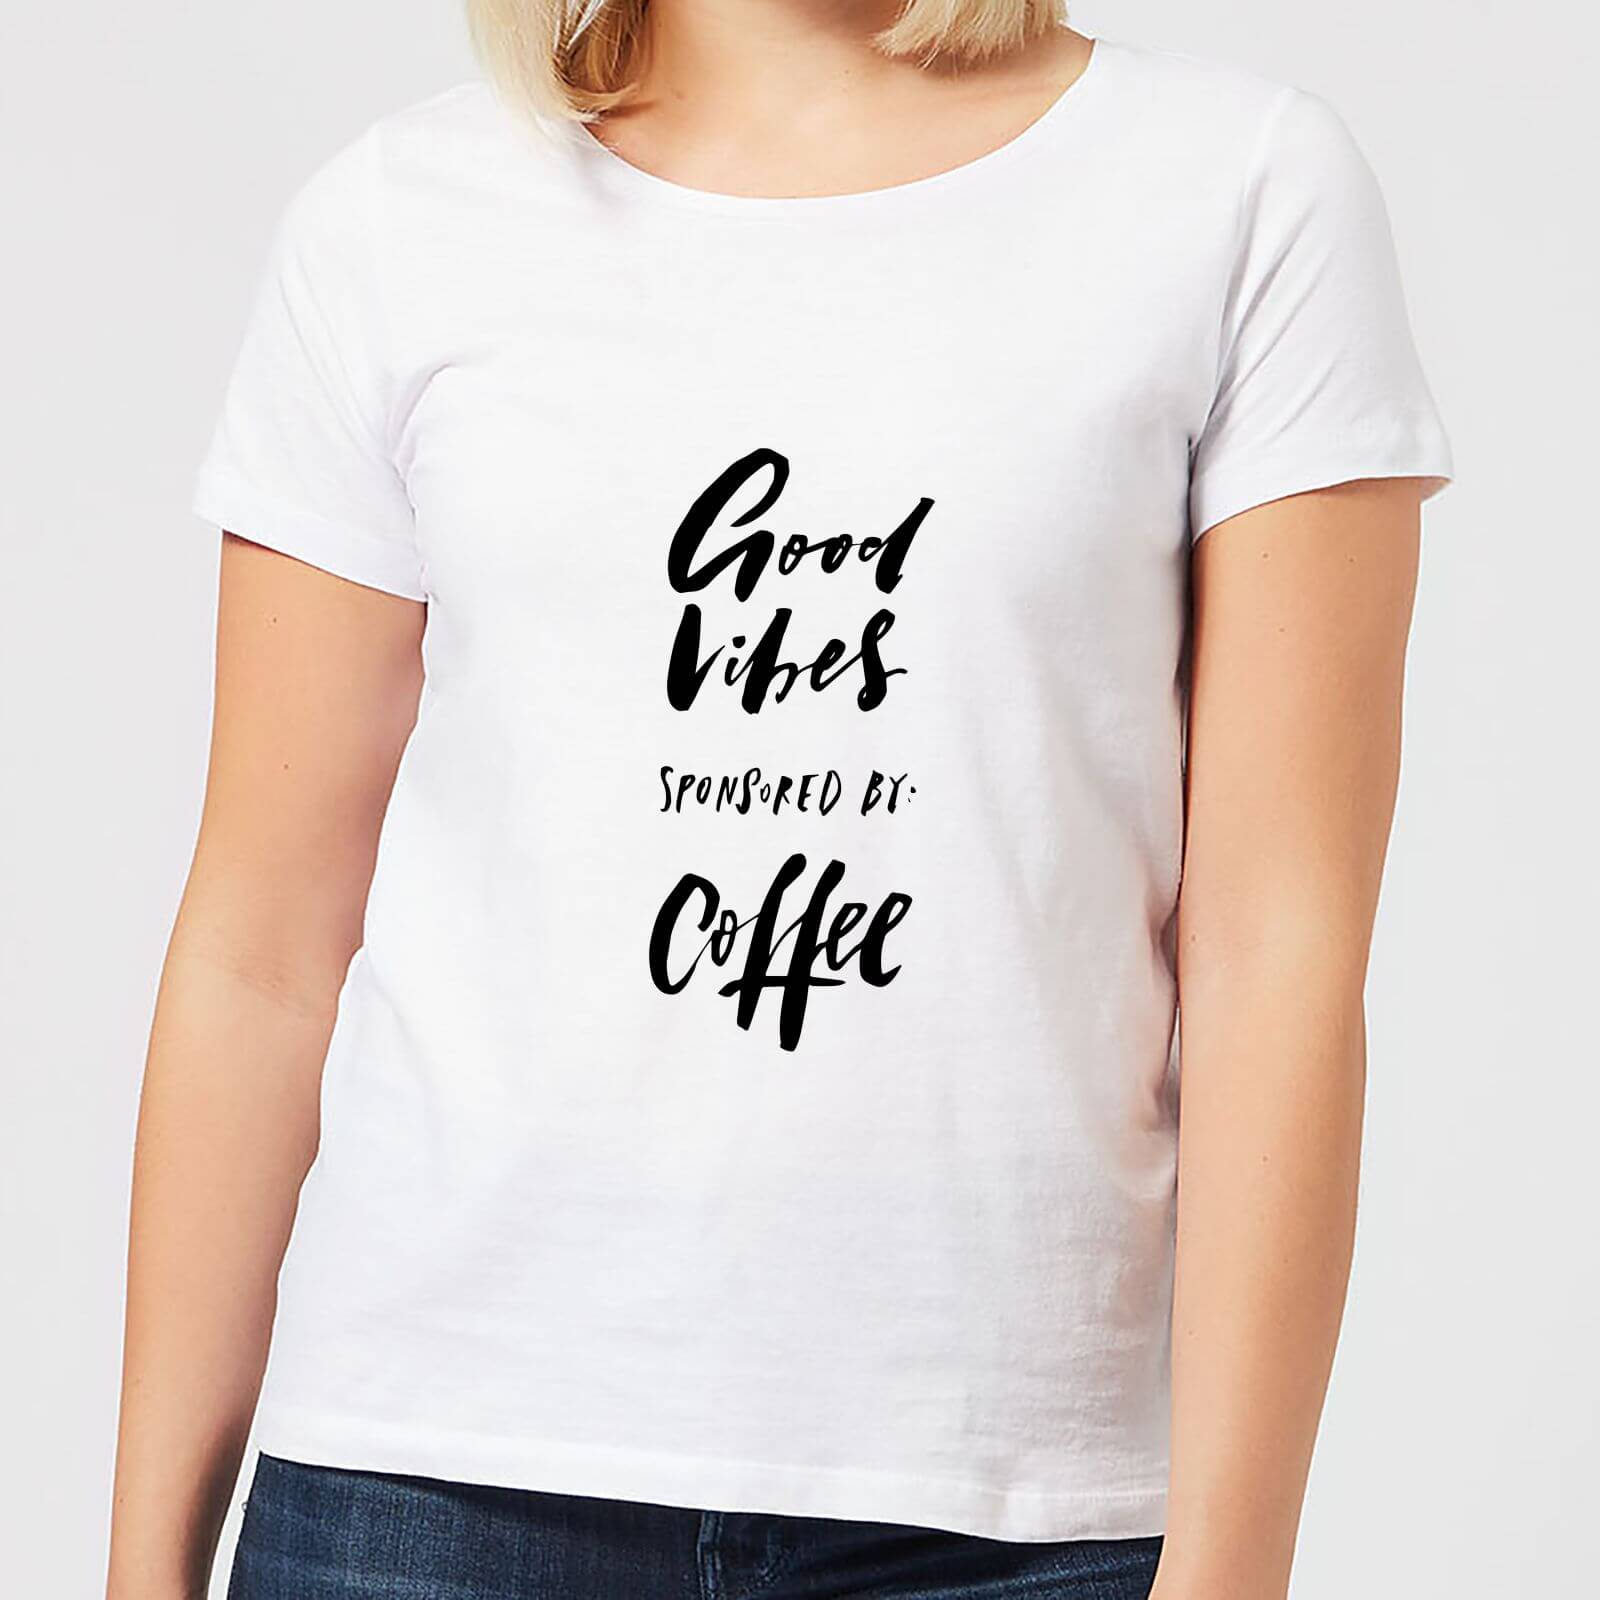 Good Vibes Sponsored By Coffee Women's T-Shirt - White - S - White